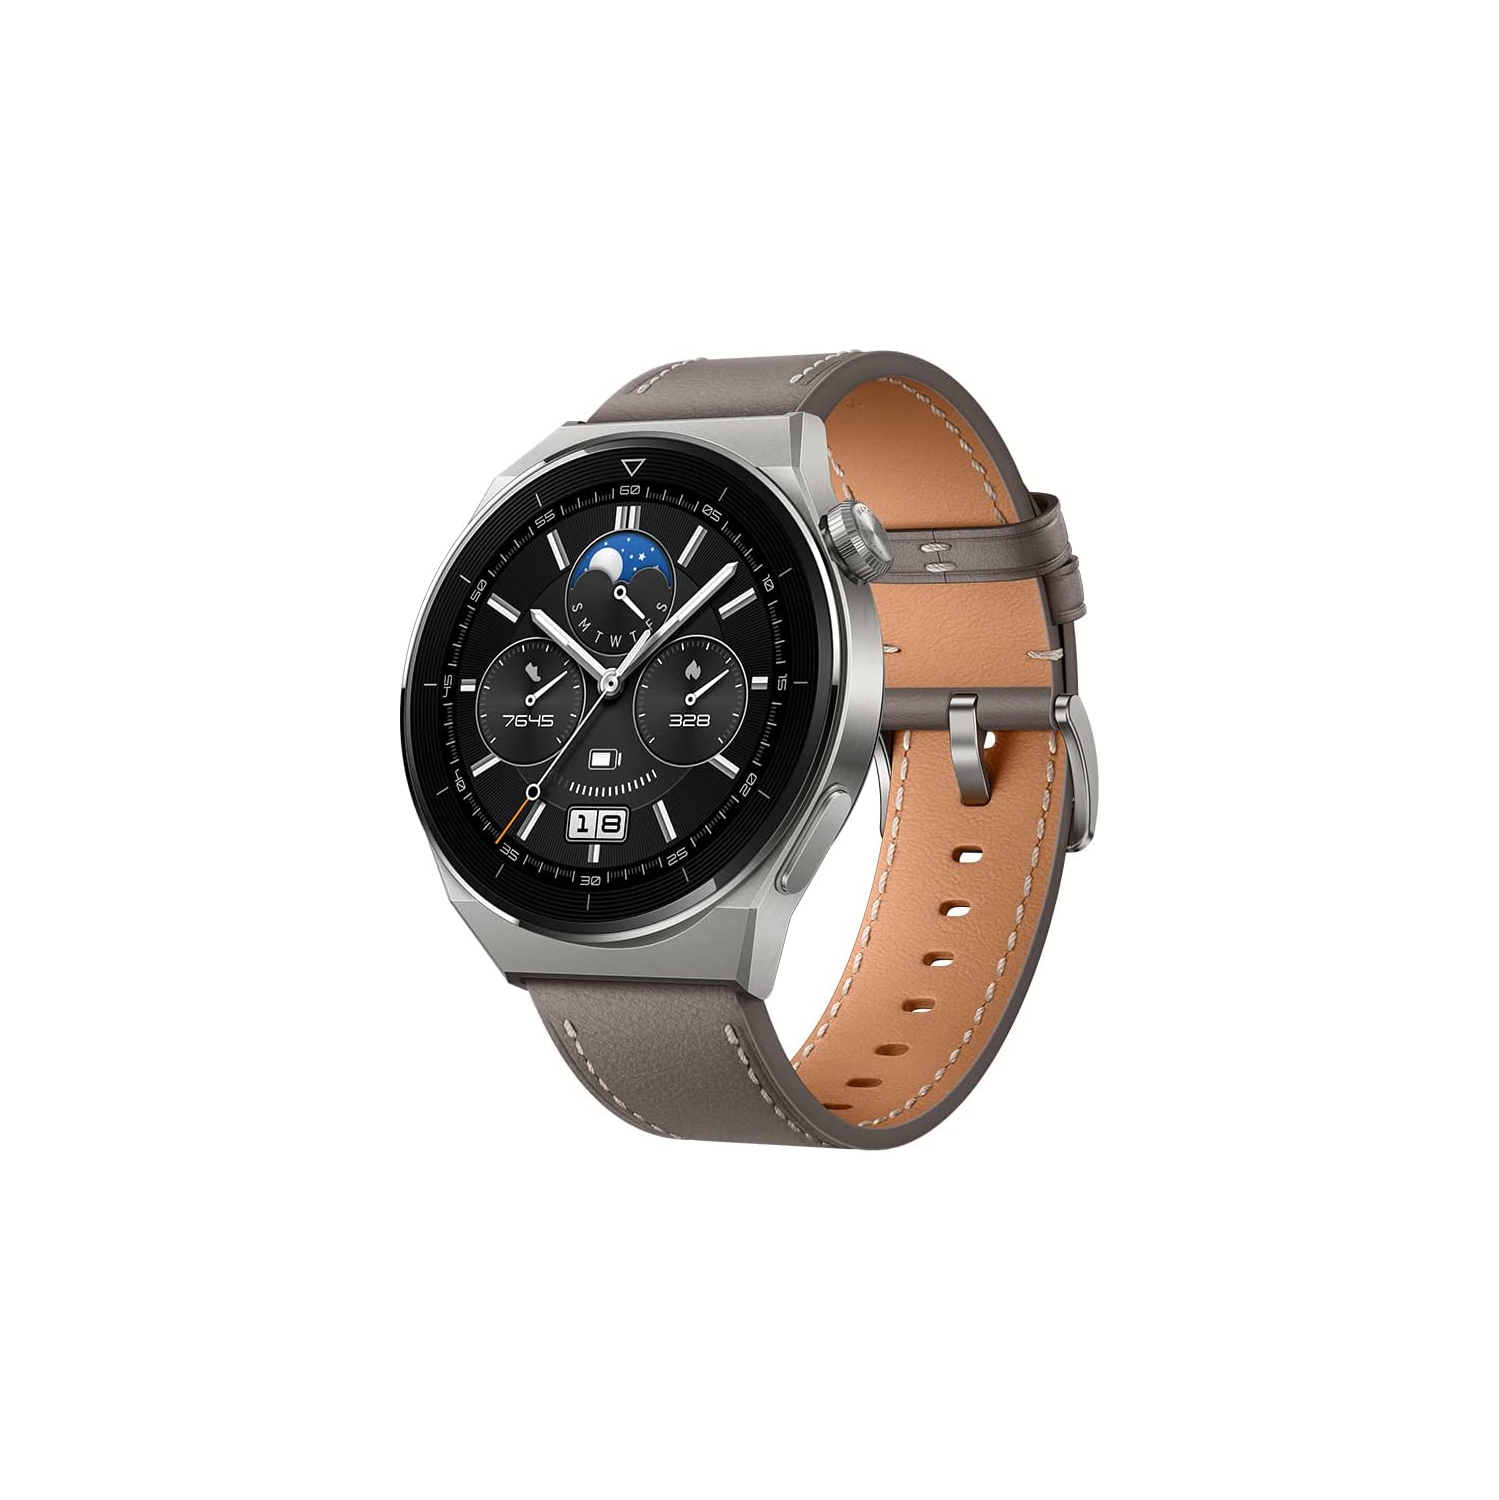 HUAWEI WATCH GT 3 Pro Classic 46mm Smartwatch - All-Day Fitness Tracker and Health Monitoring - Durable Battery - Sapphire Watch Dial - Bluetooth Calling - Gray Leather Strap